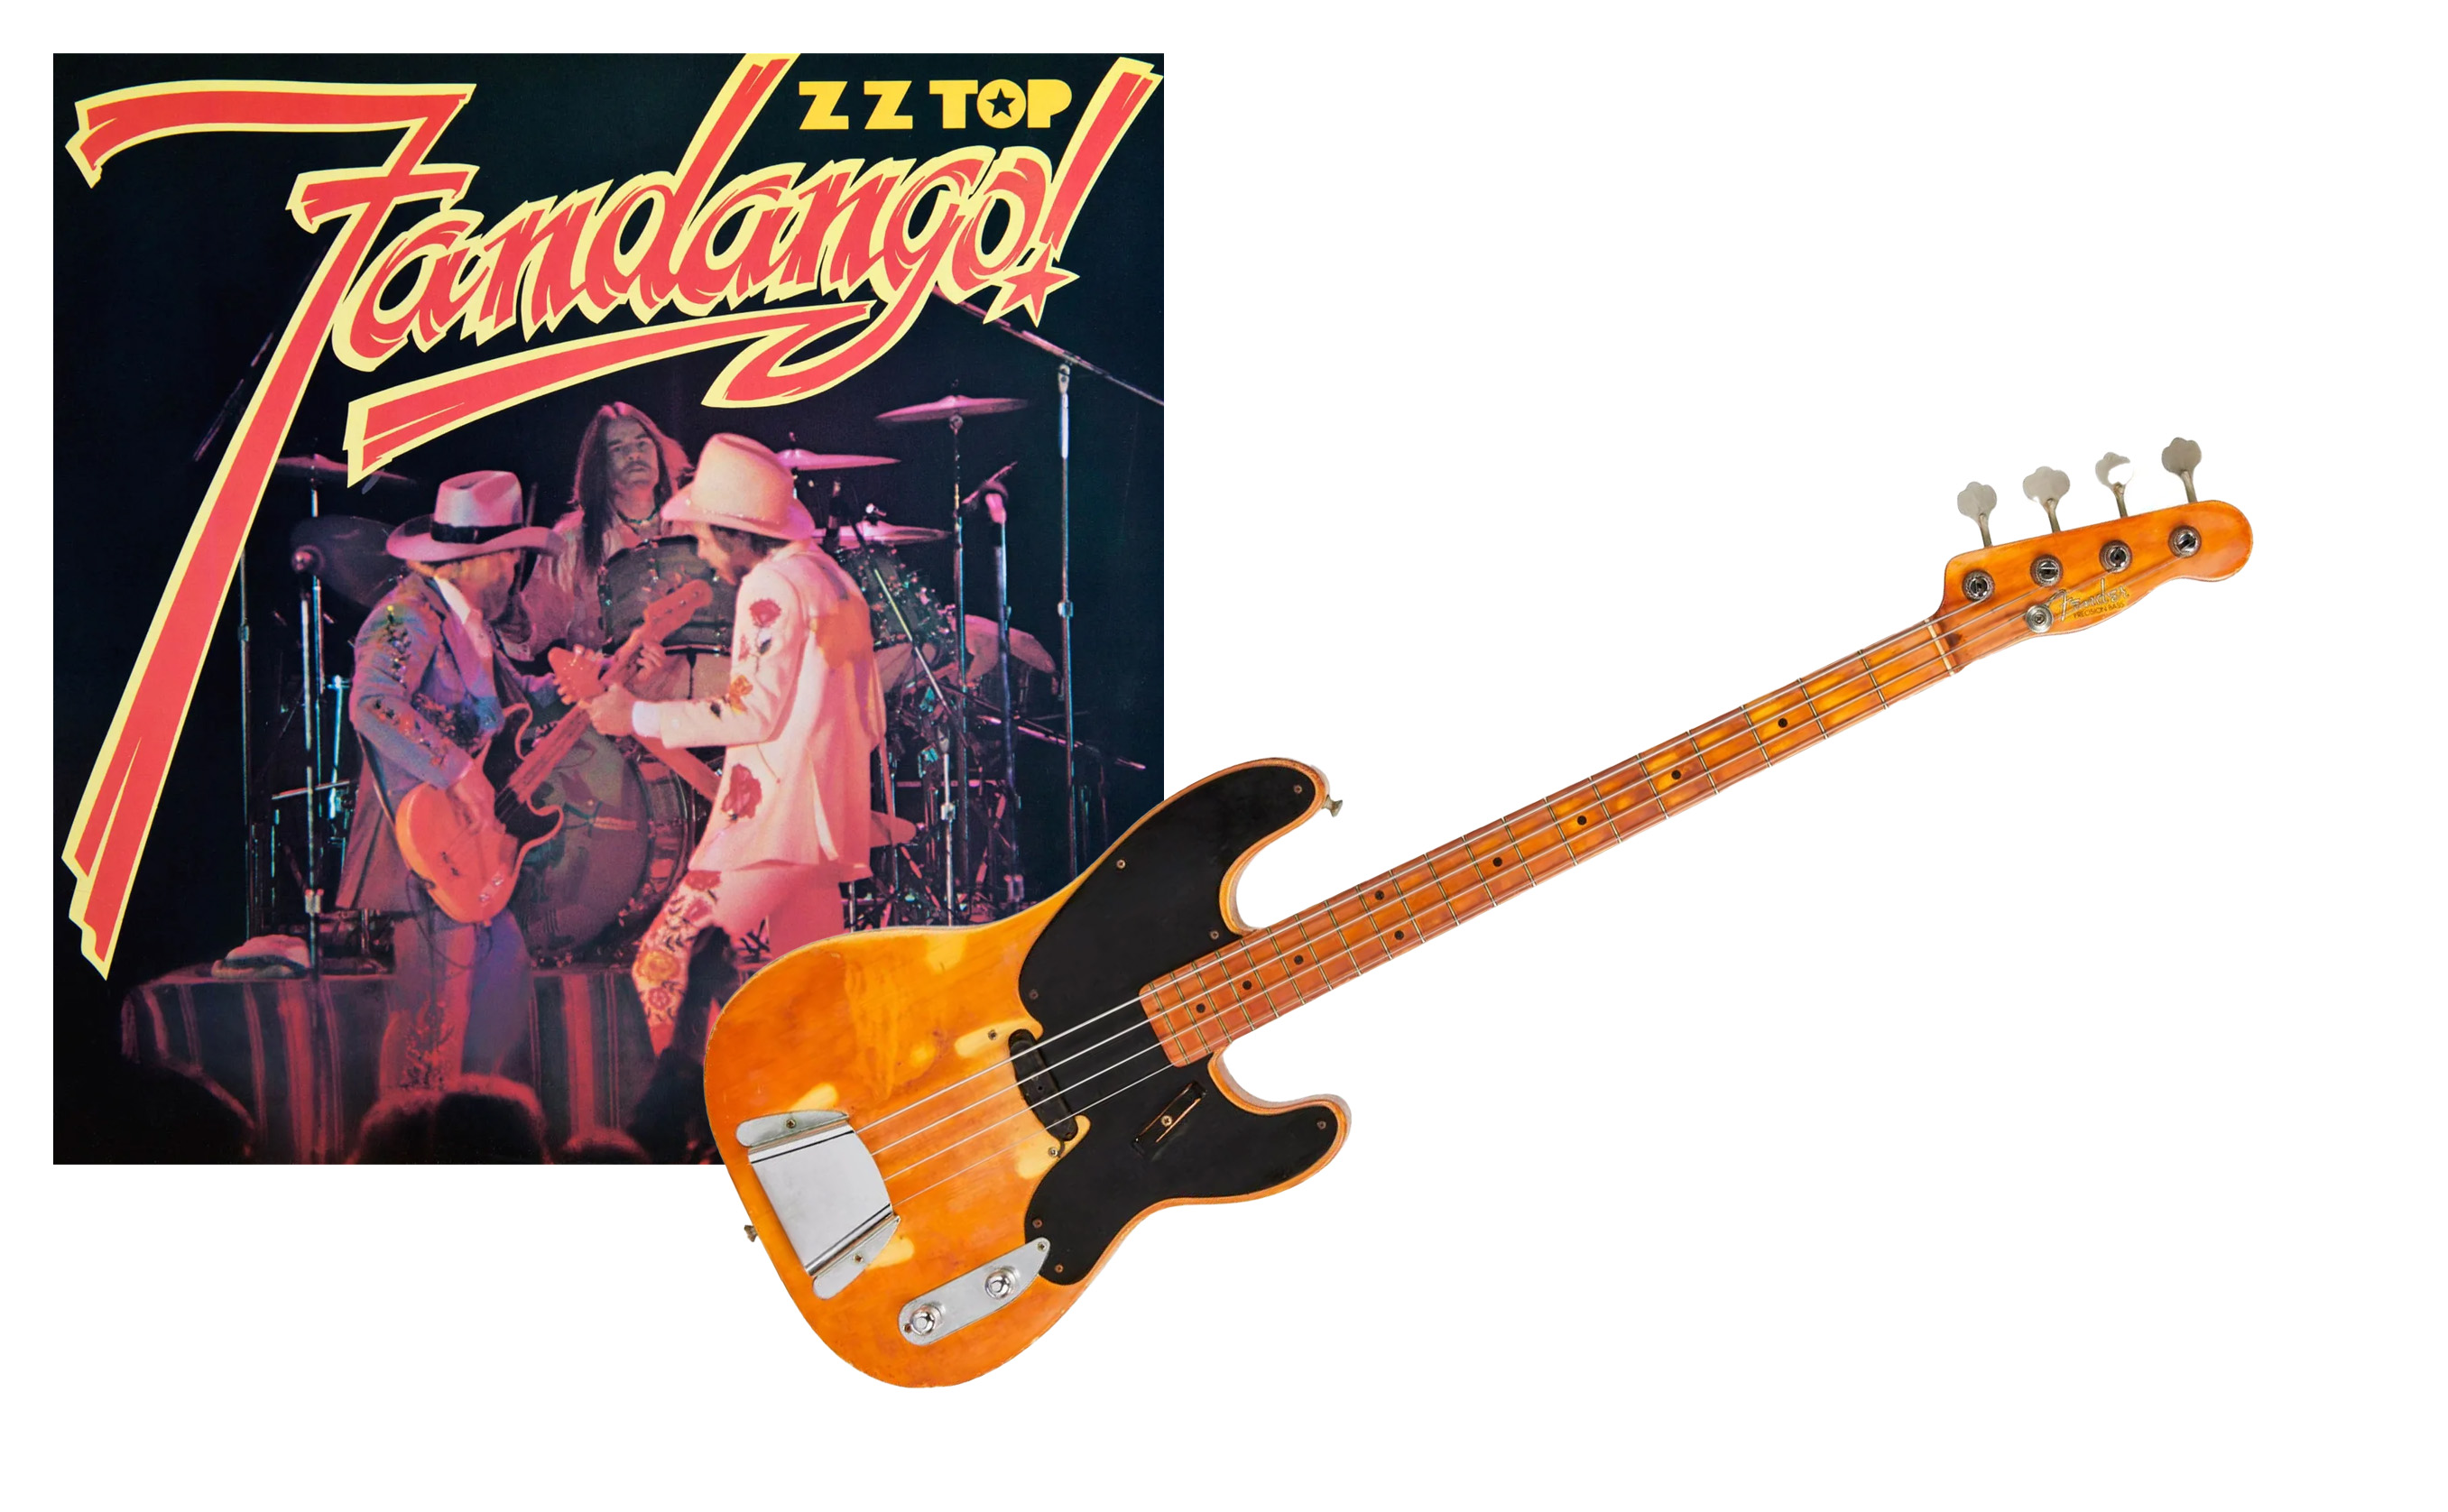 Eliminator: ZZ Top&#8217;s Dusty Hill collection blew away presale estimates, claiming $3M+ at Julien&#8217;s